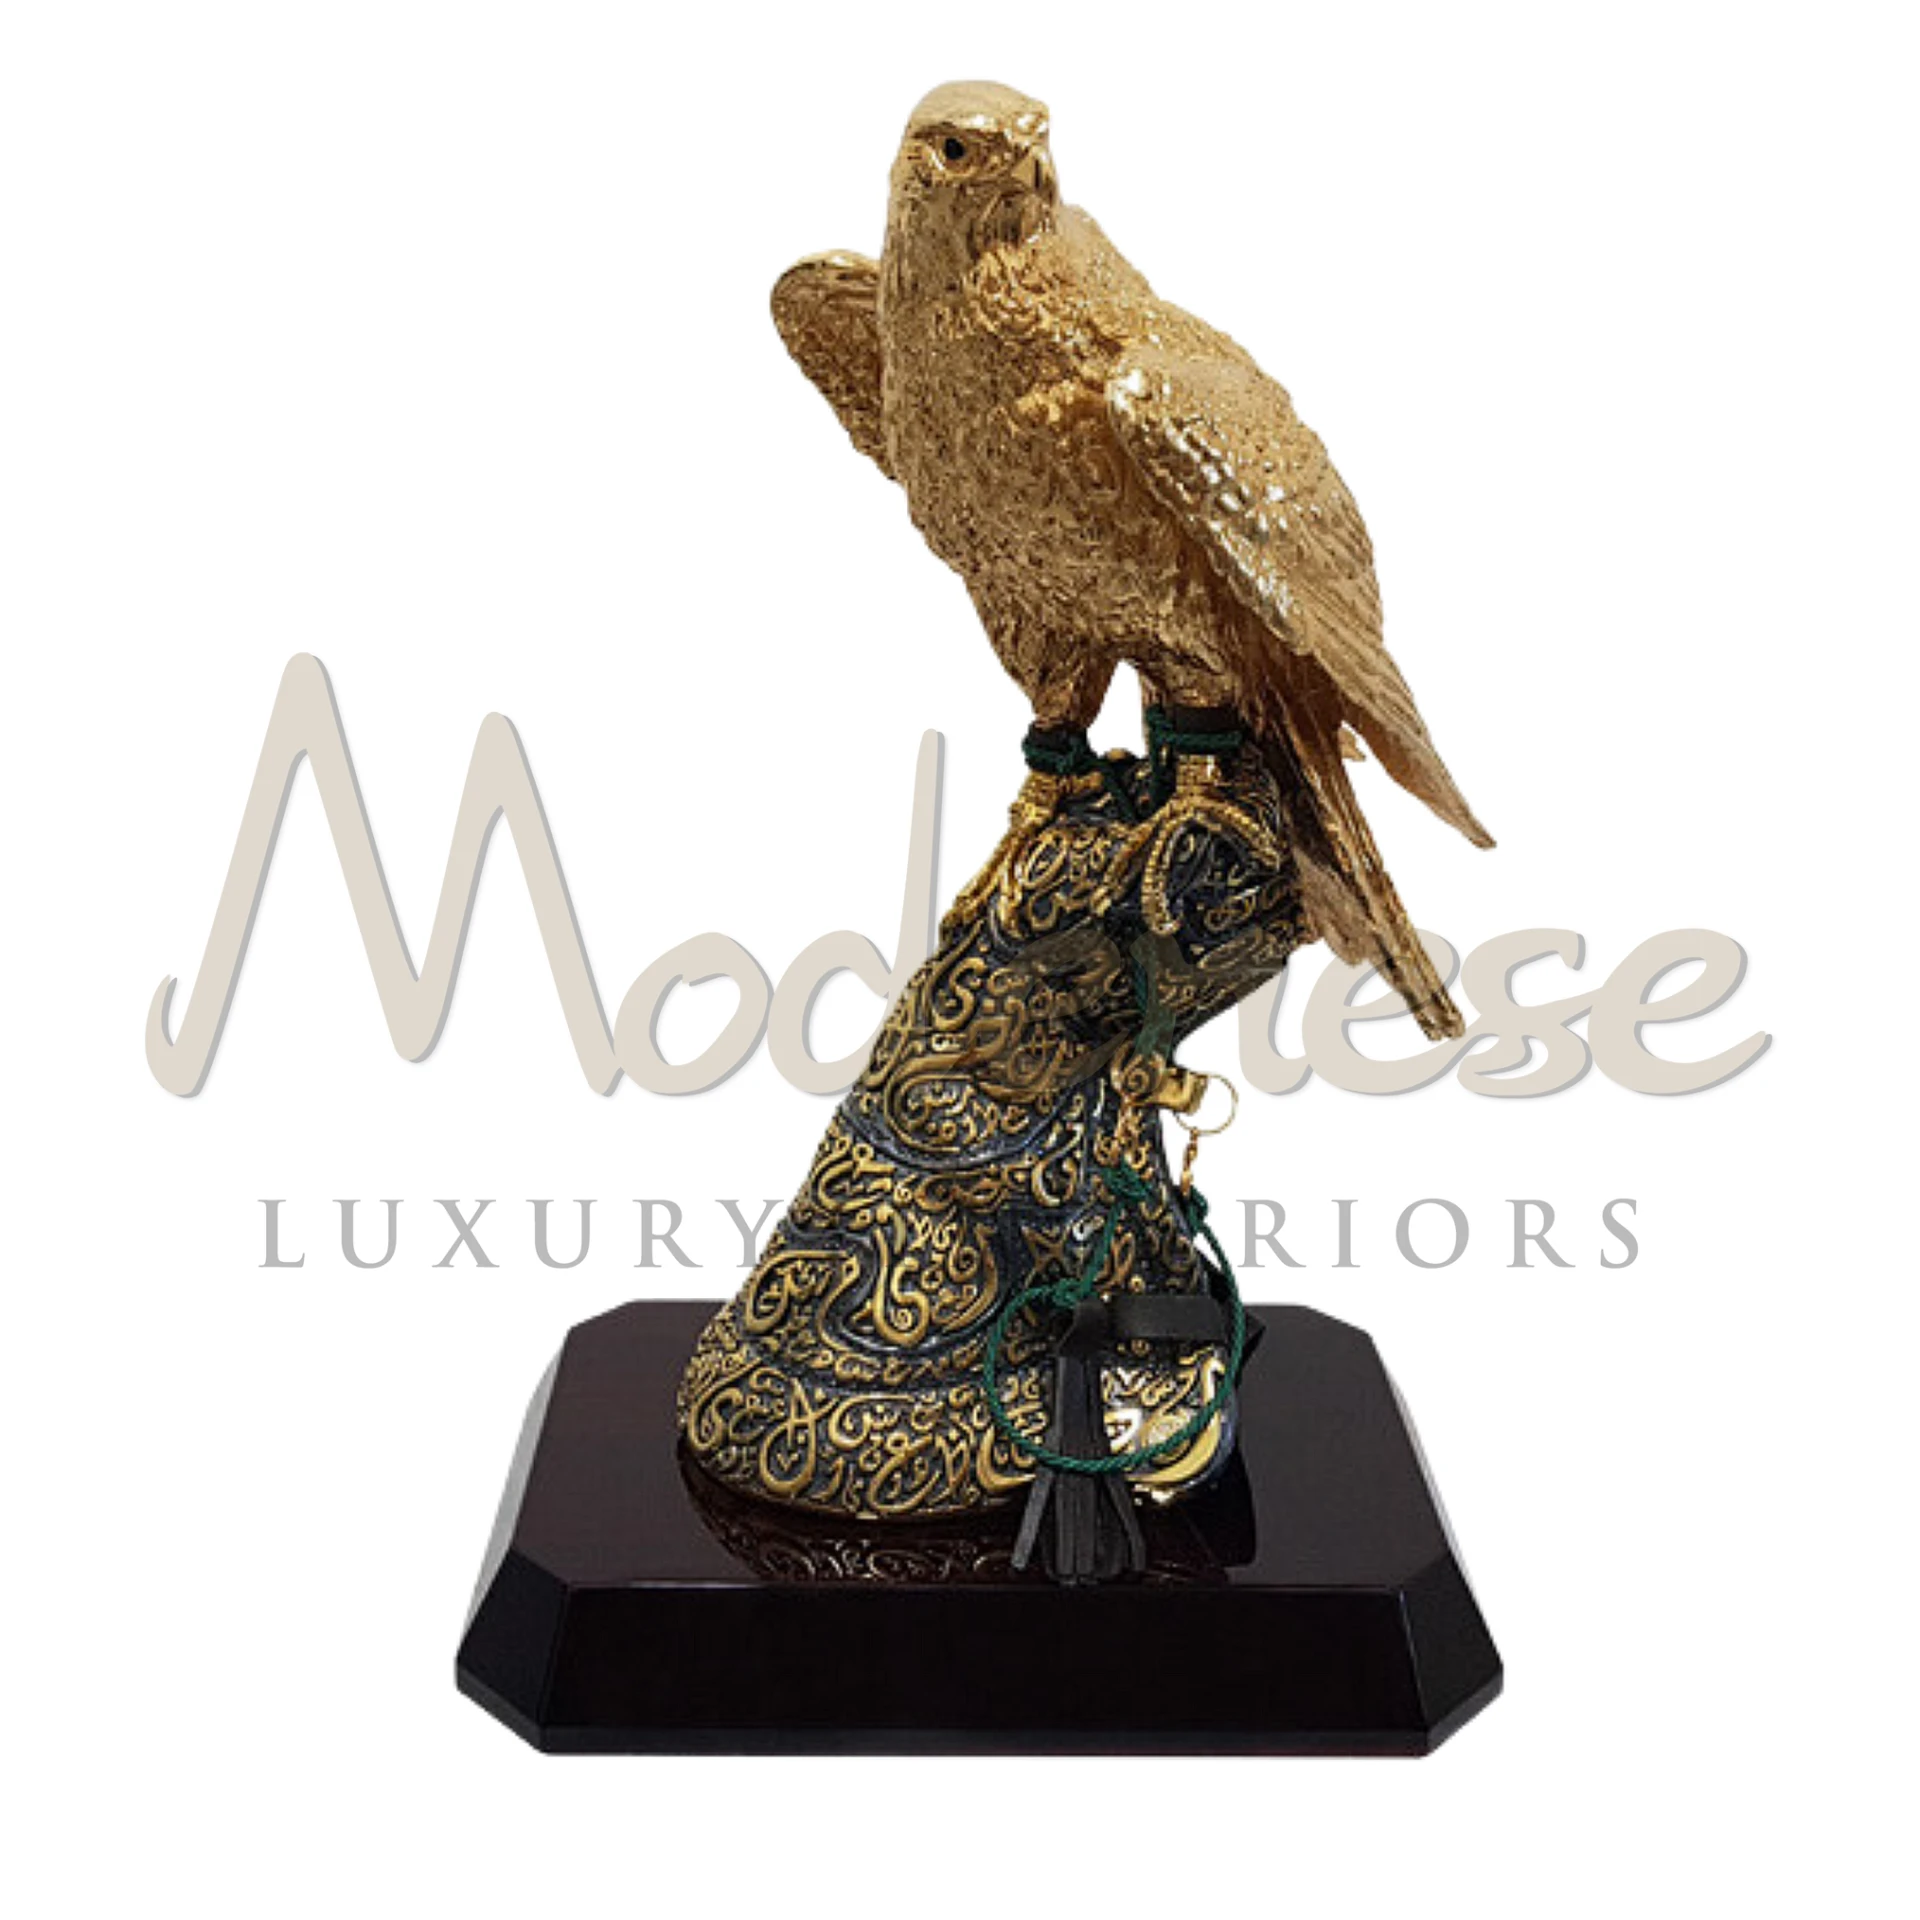 Designer Gold Falcon ornament in various dynamic poses, with luxurious gold finish and intricate detailing, ideal for sophisticated home or office décor.